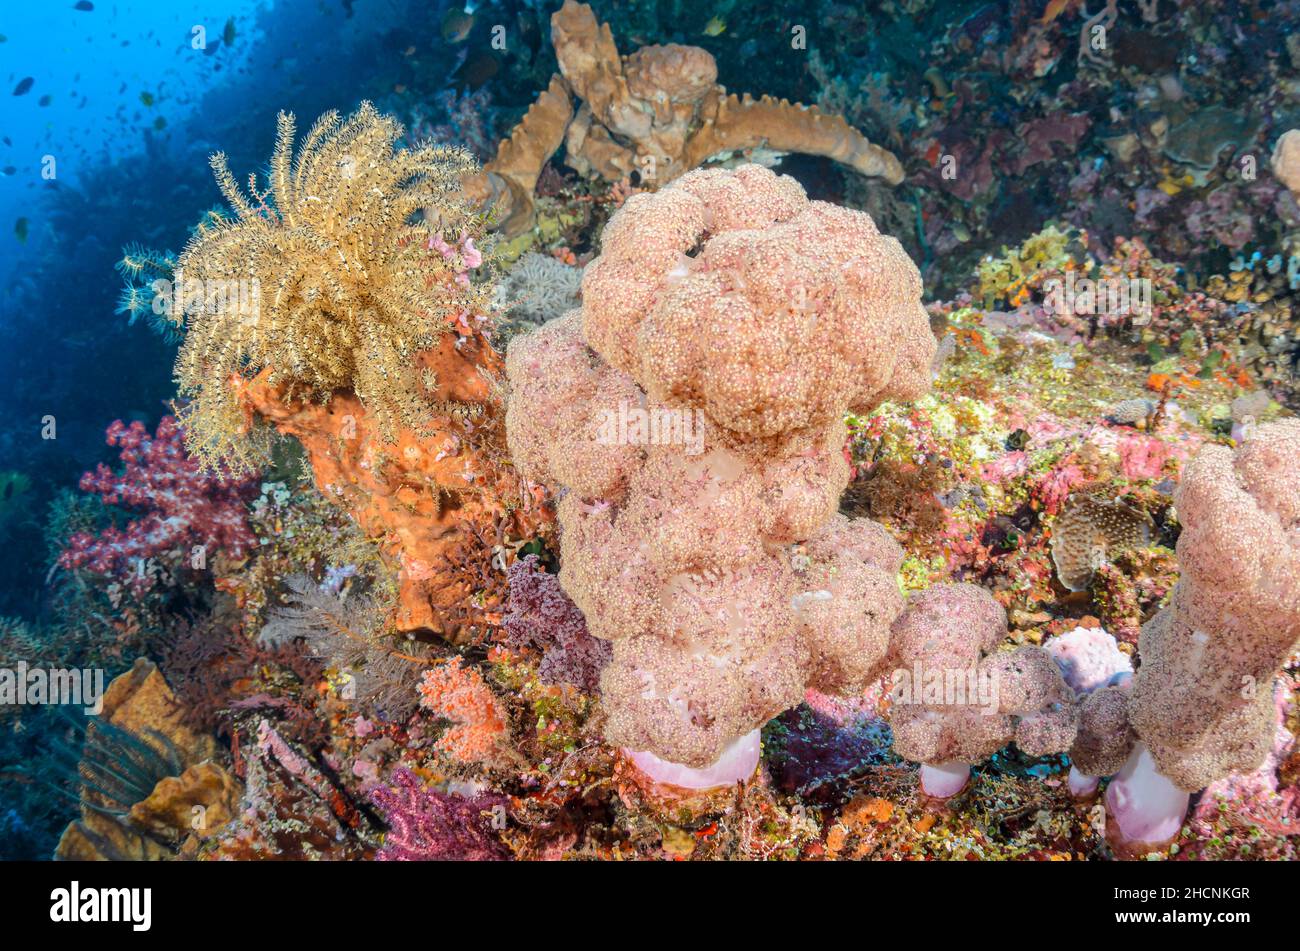 Coral reef scene with Tree coral, Dendronephthya sp.,  and feather stars, Clarkcomanthus alternans, Alor, Nusa Tenggara, Indonesia, Pacific Stock Photo